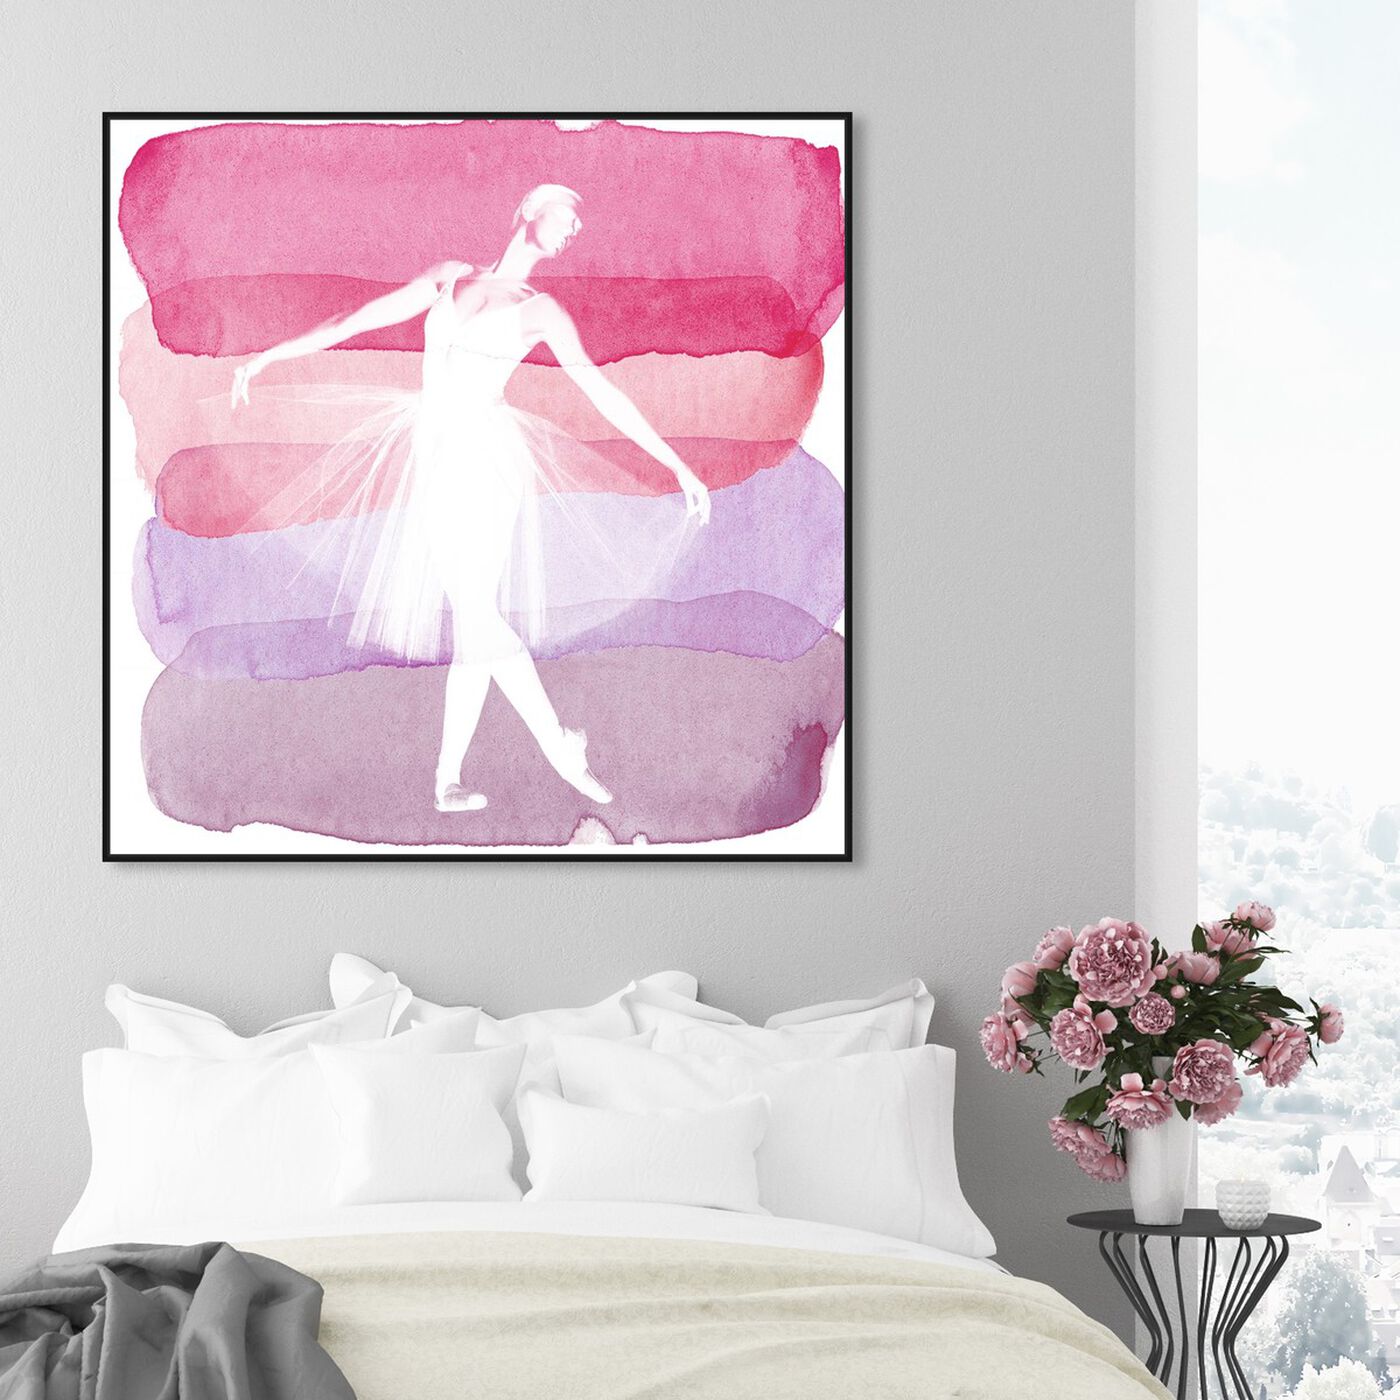 Hanging view of Petal Ballerina Three featuring sports and teams and ballet art.